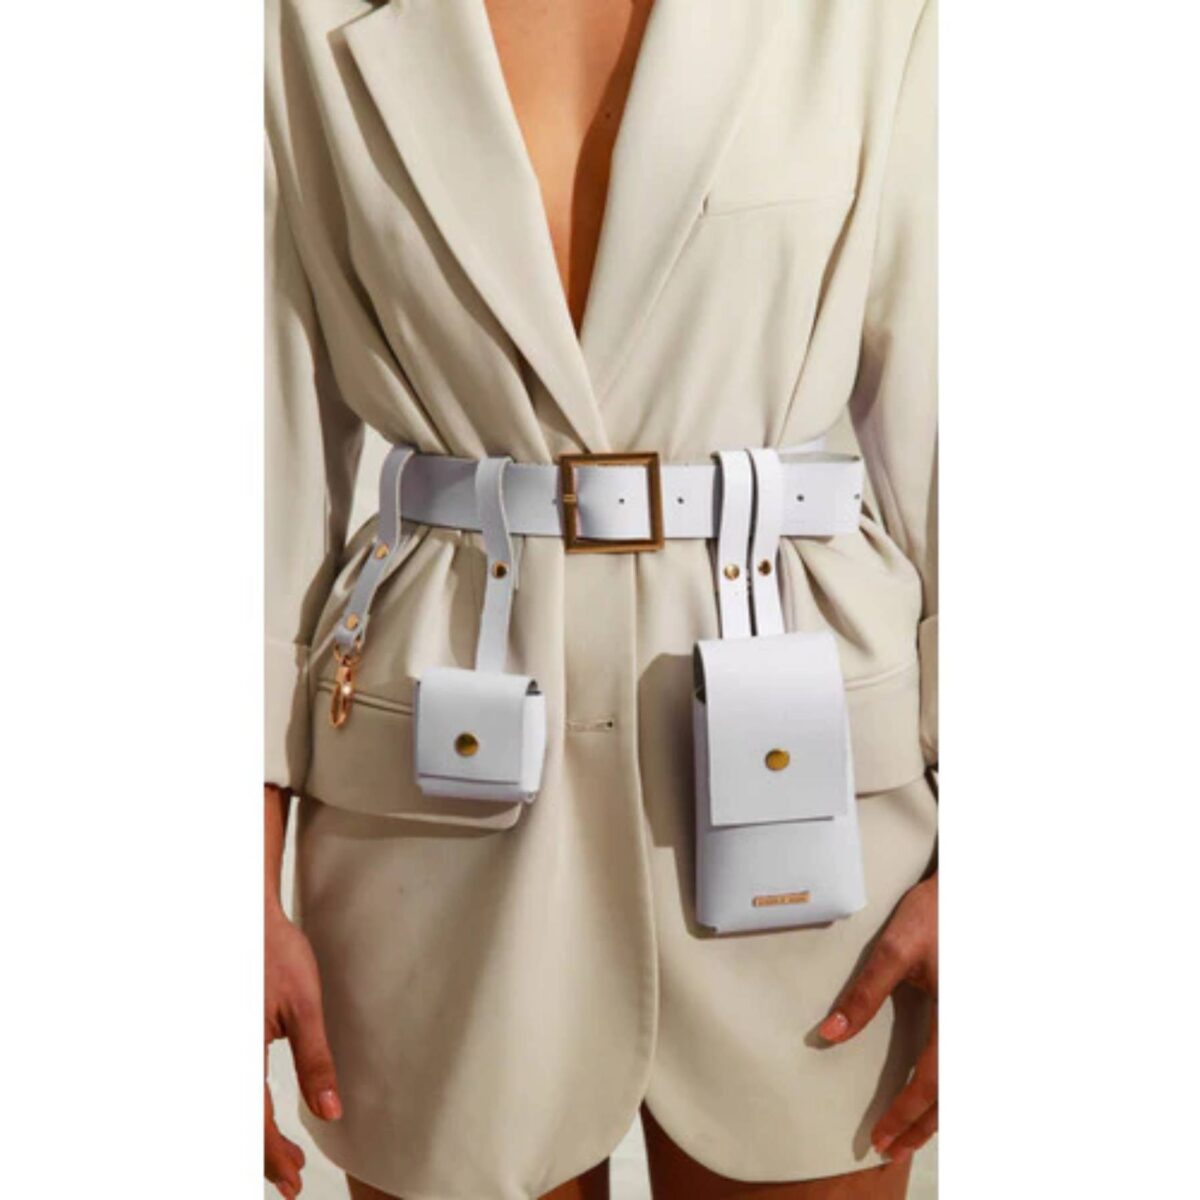 queen_of_harns_belt-pocket_new_collection